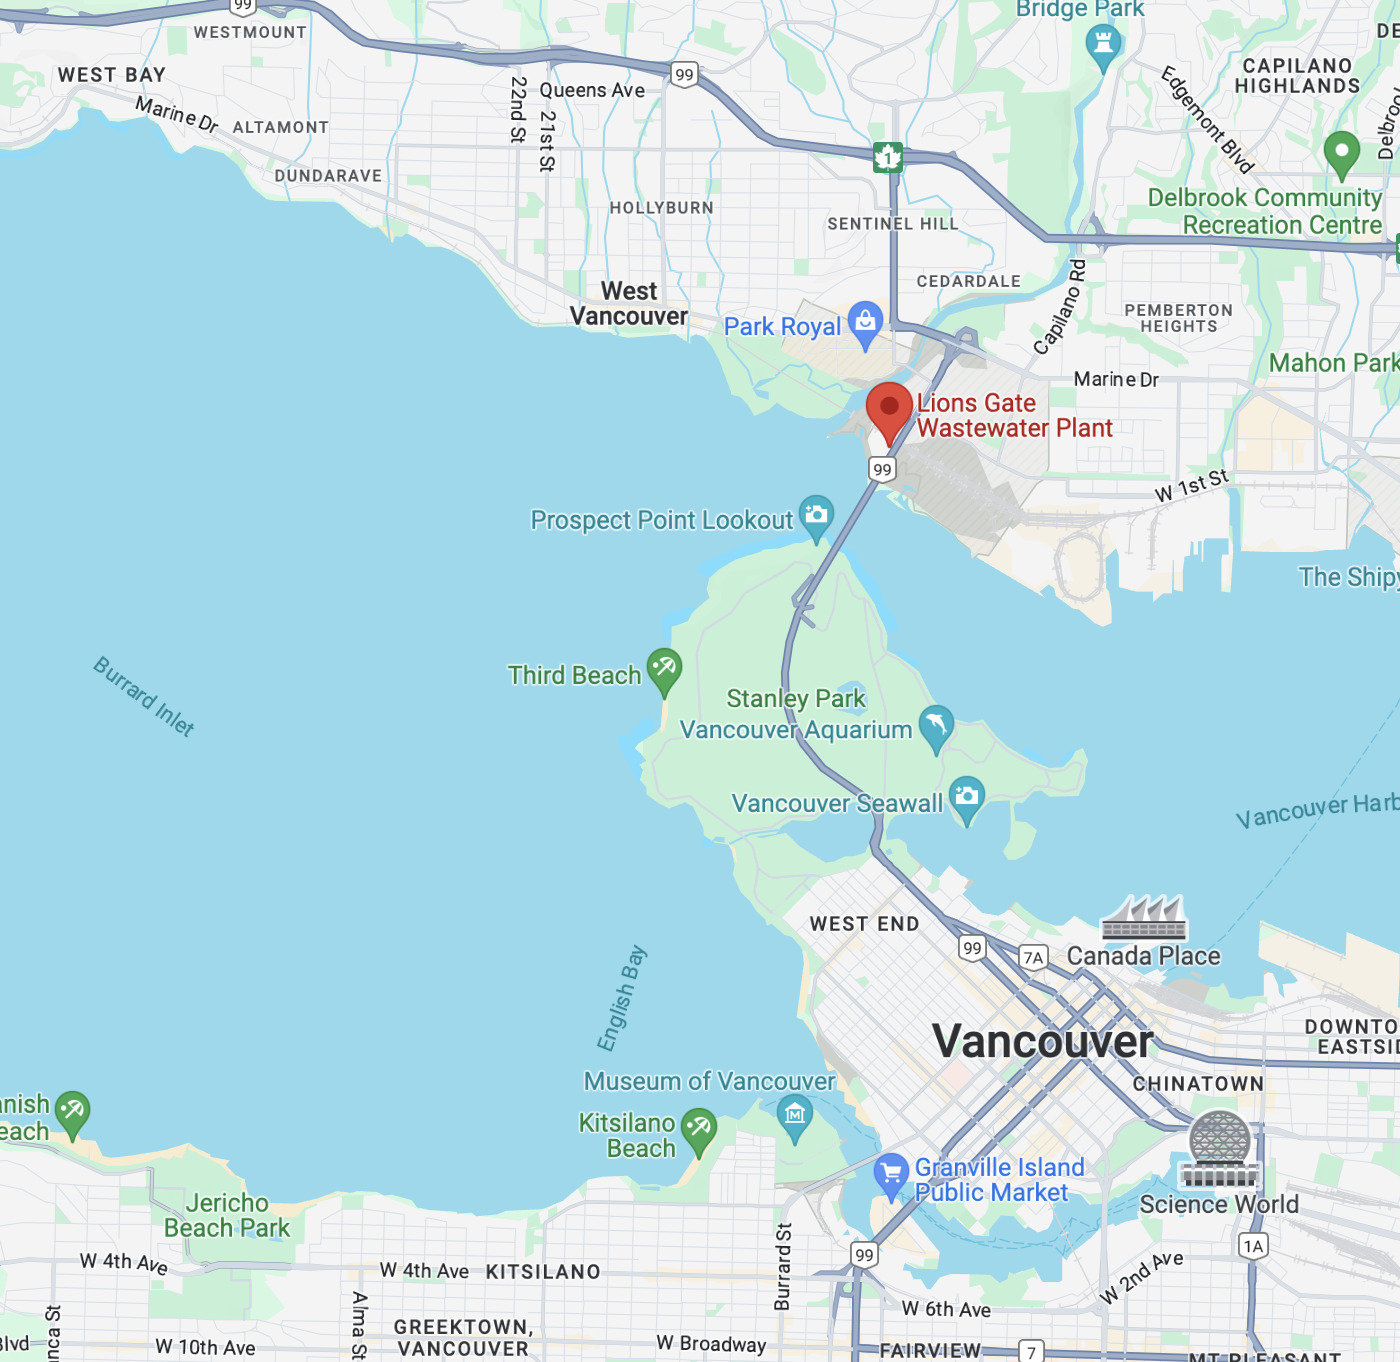 A Google Map of northern Vancouver, with Lions Gate Wastewater Plant marked.